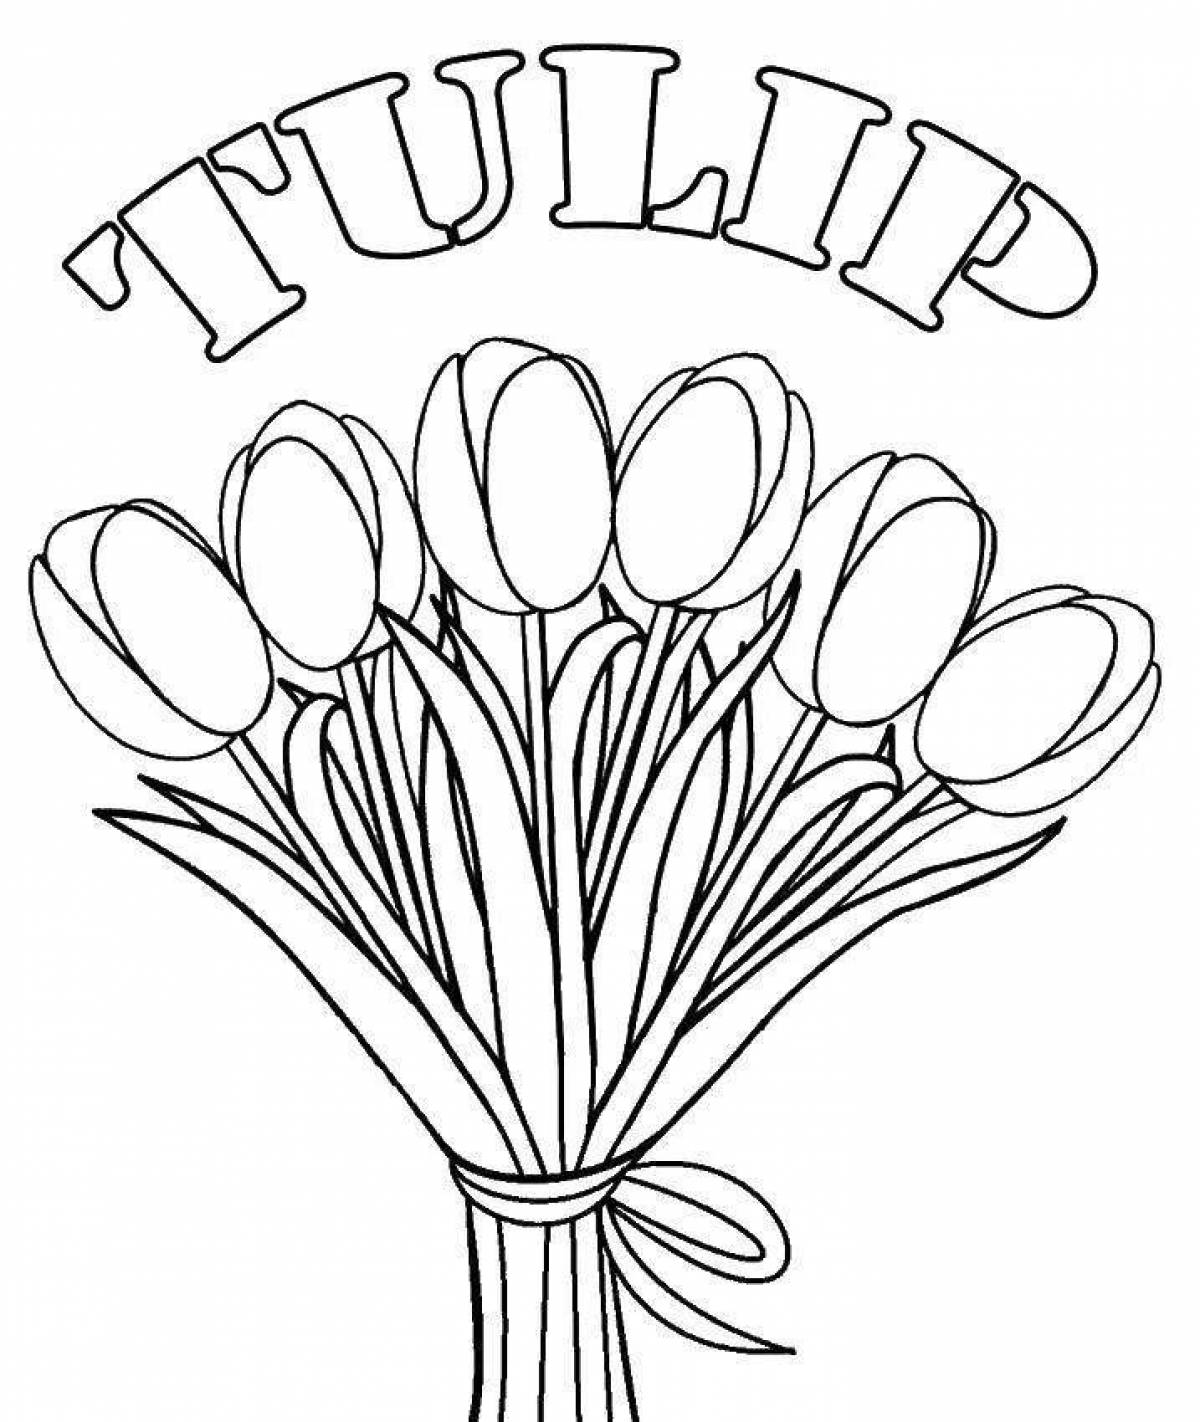 Coloring colorful bouquet of tulips